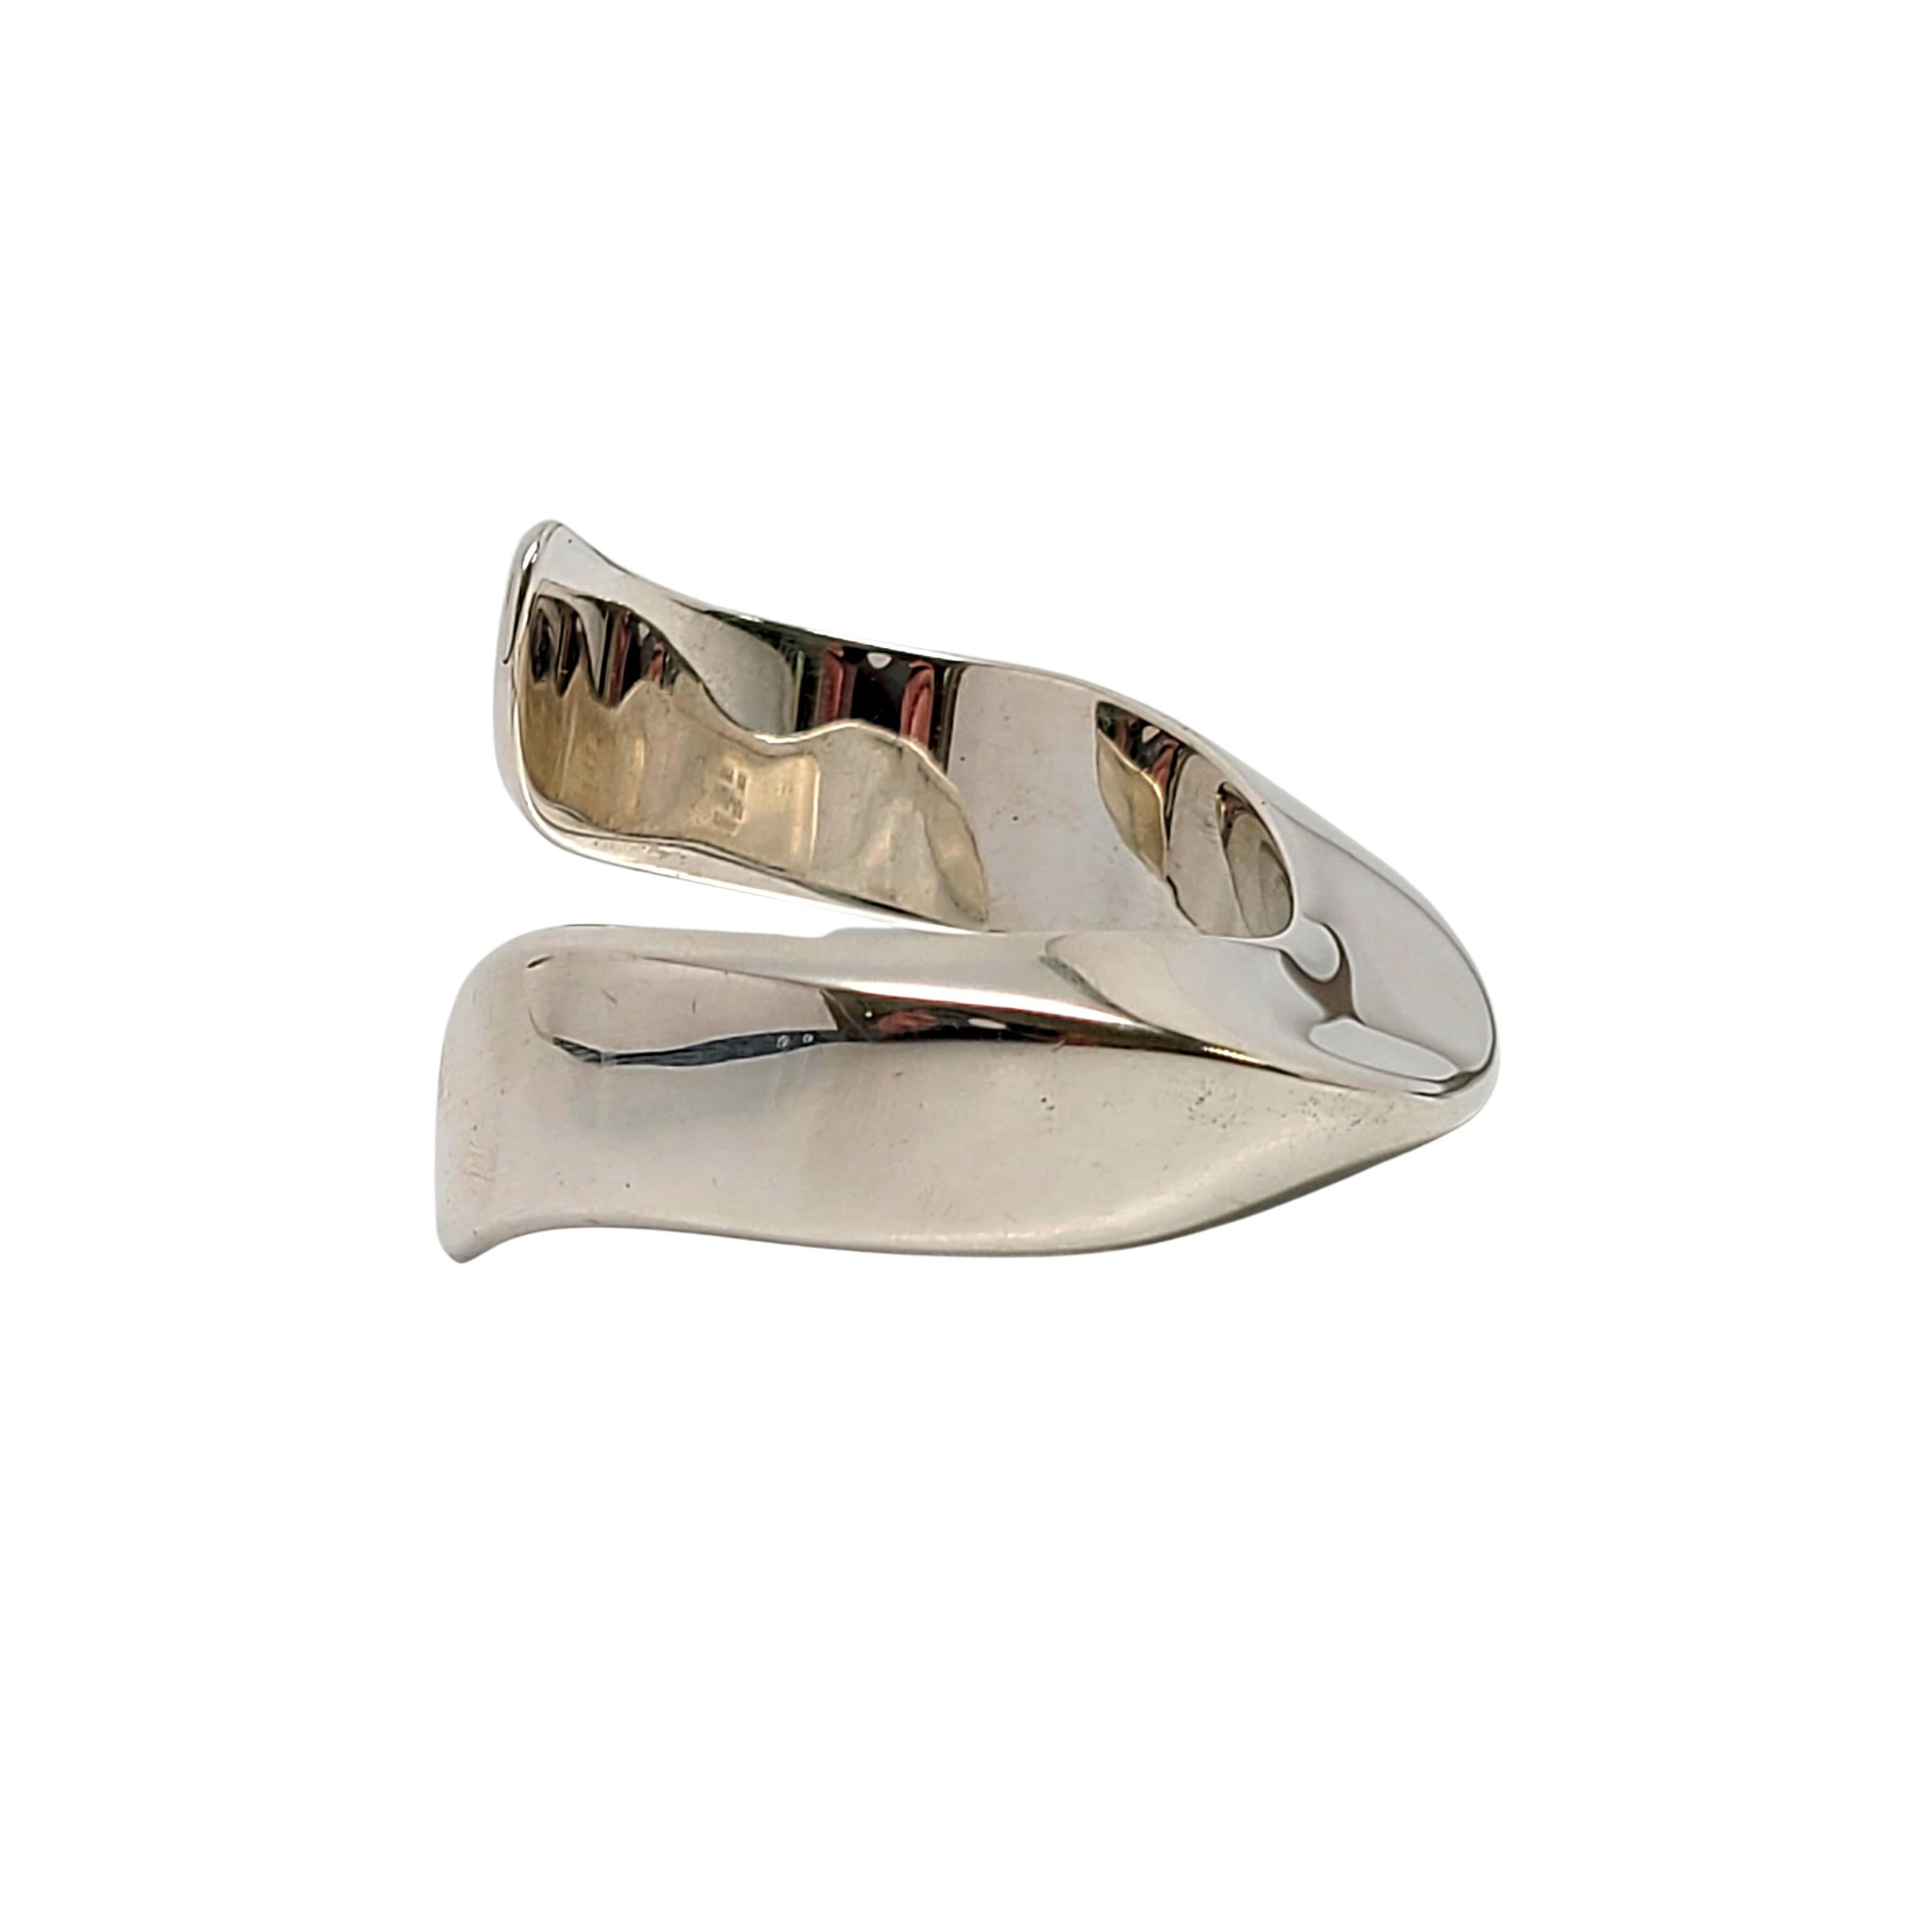 Tiffany & Co sterling silver swirl cuff bracelet by Elsa Peretti.

Authentic Tiffany sterling silver bracelet featuring a contour design, a substantial modern vintage piece. Tiffany pouch and box not included.

Measures approx 6